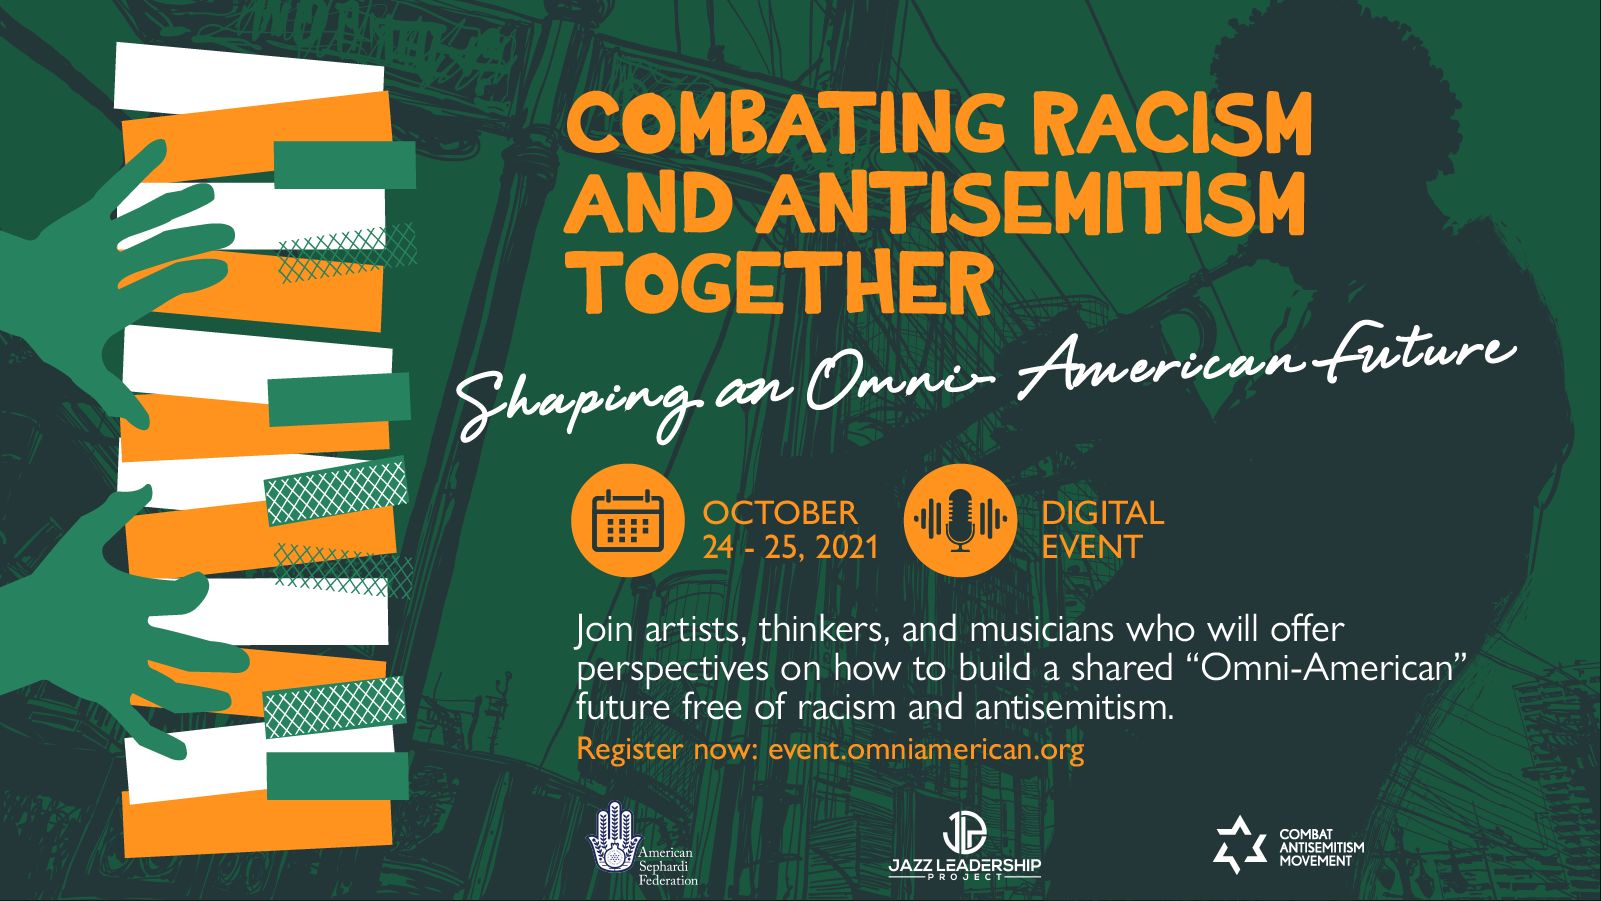 Combating Racism and Antisemitism Together: Shaping an Omni-American Future, Online Event